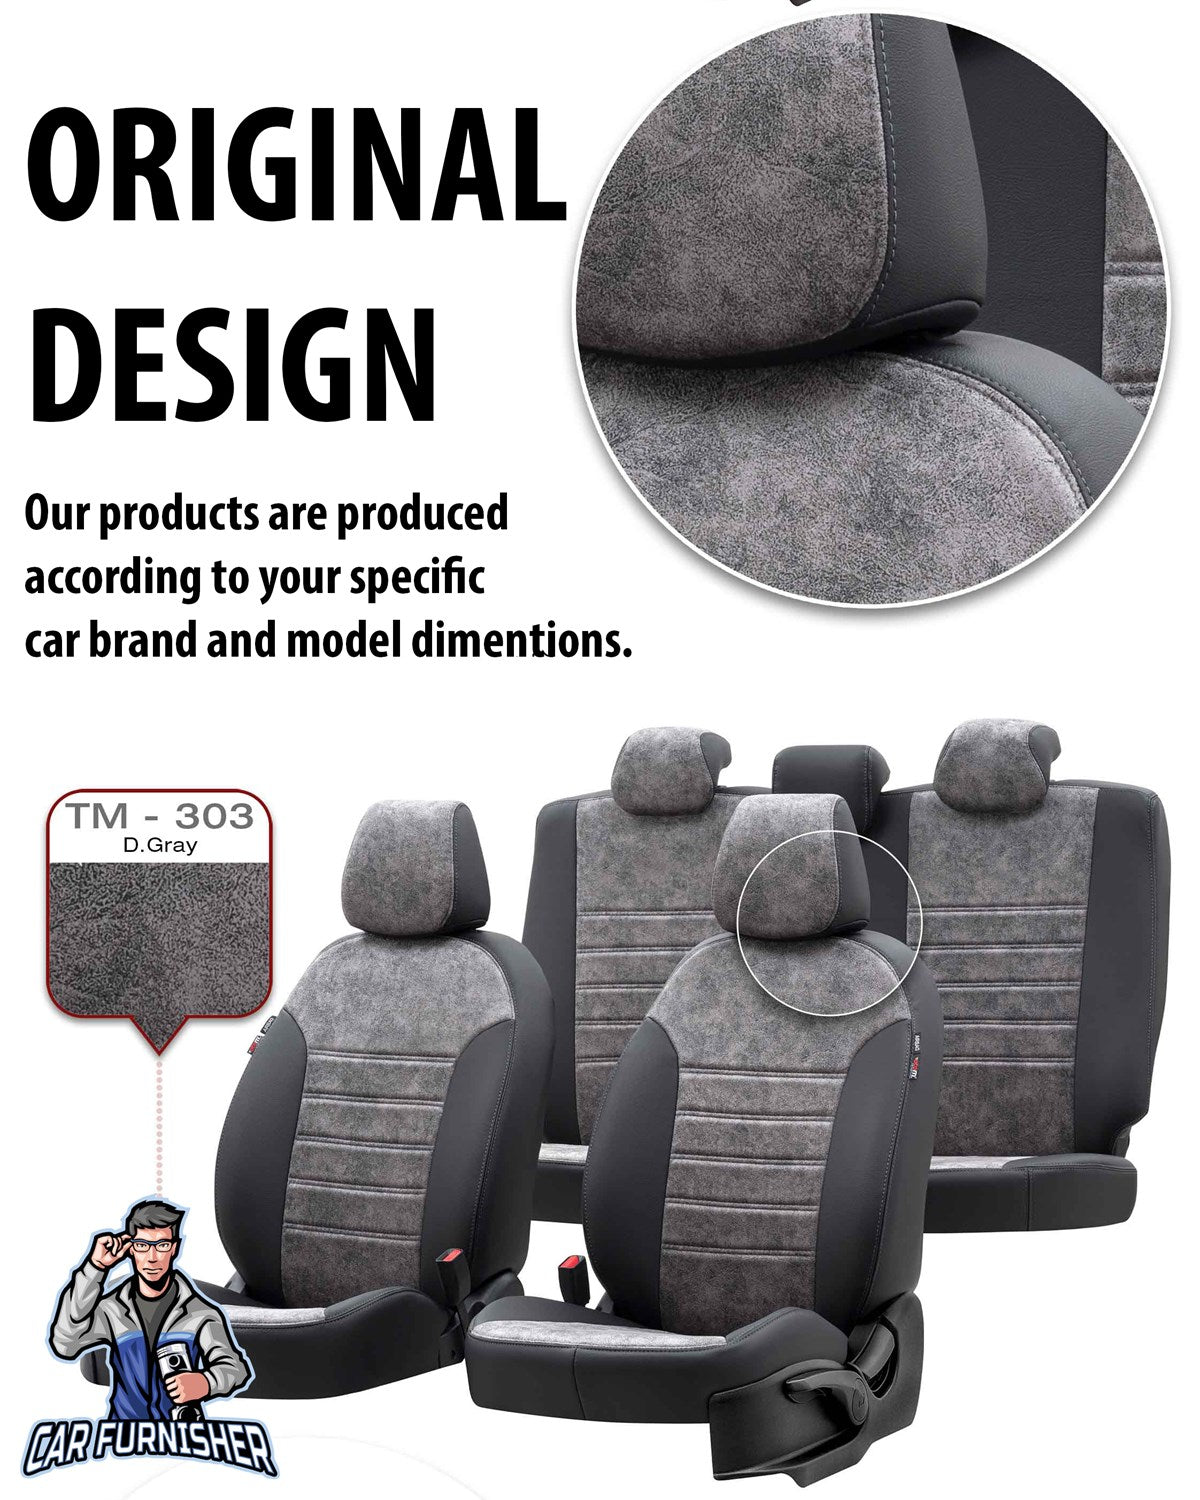 Toyota Hilux Seat Cover Milano Suede Design Burgundy Leather & Suede Fabric